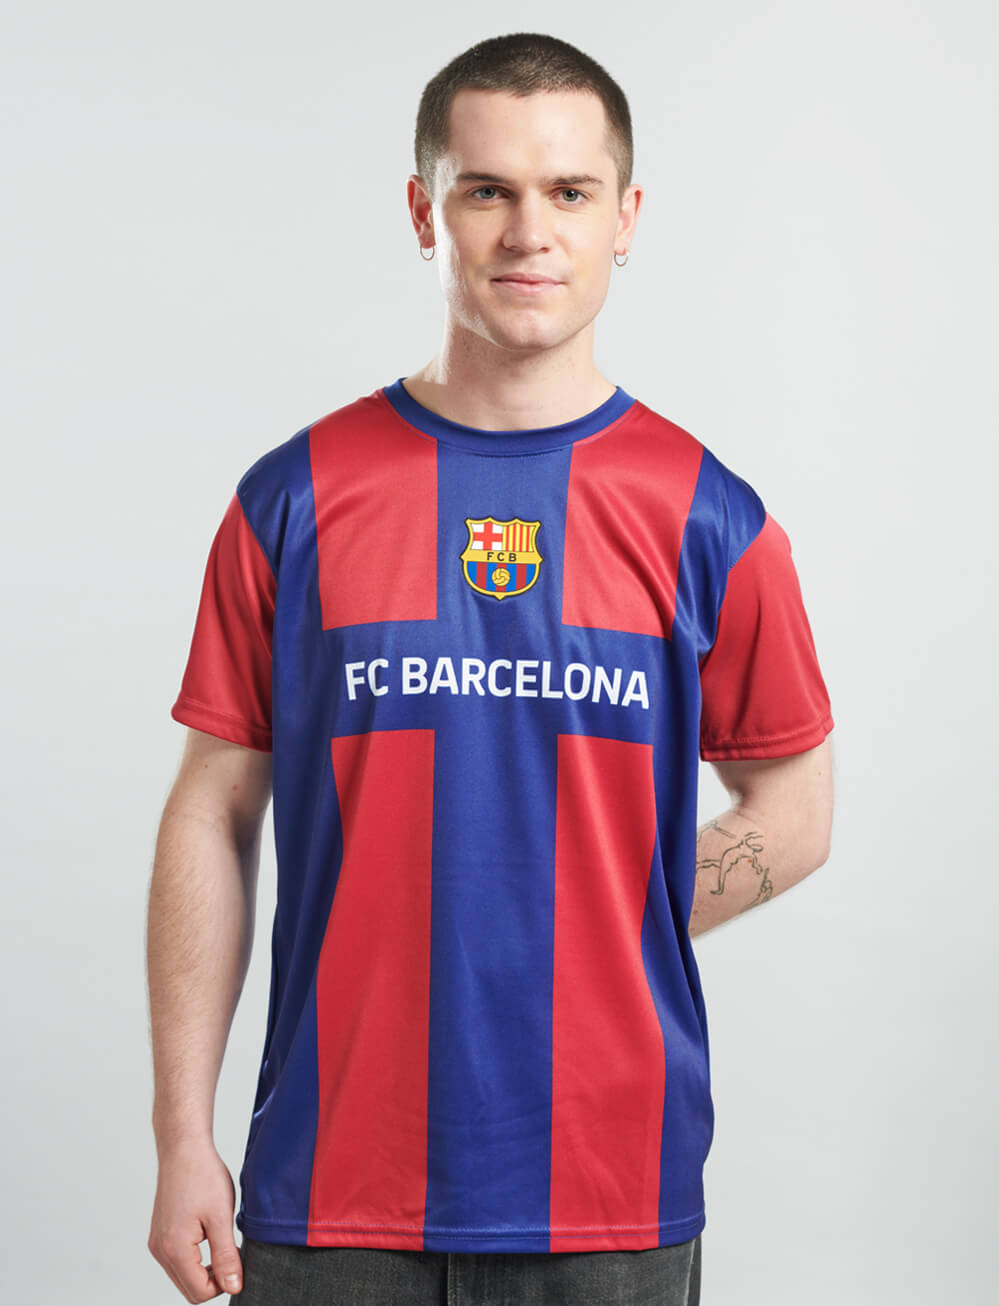 Official FC Barcelona 1st Team T-Shirt - Navy/Red - The World Football Store